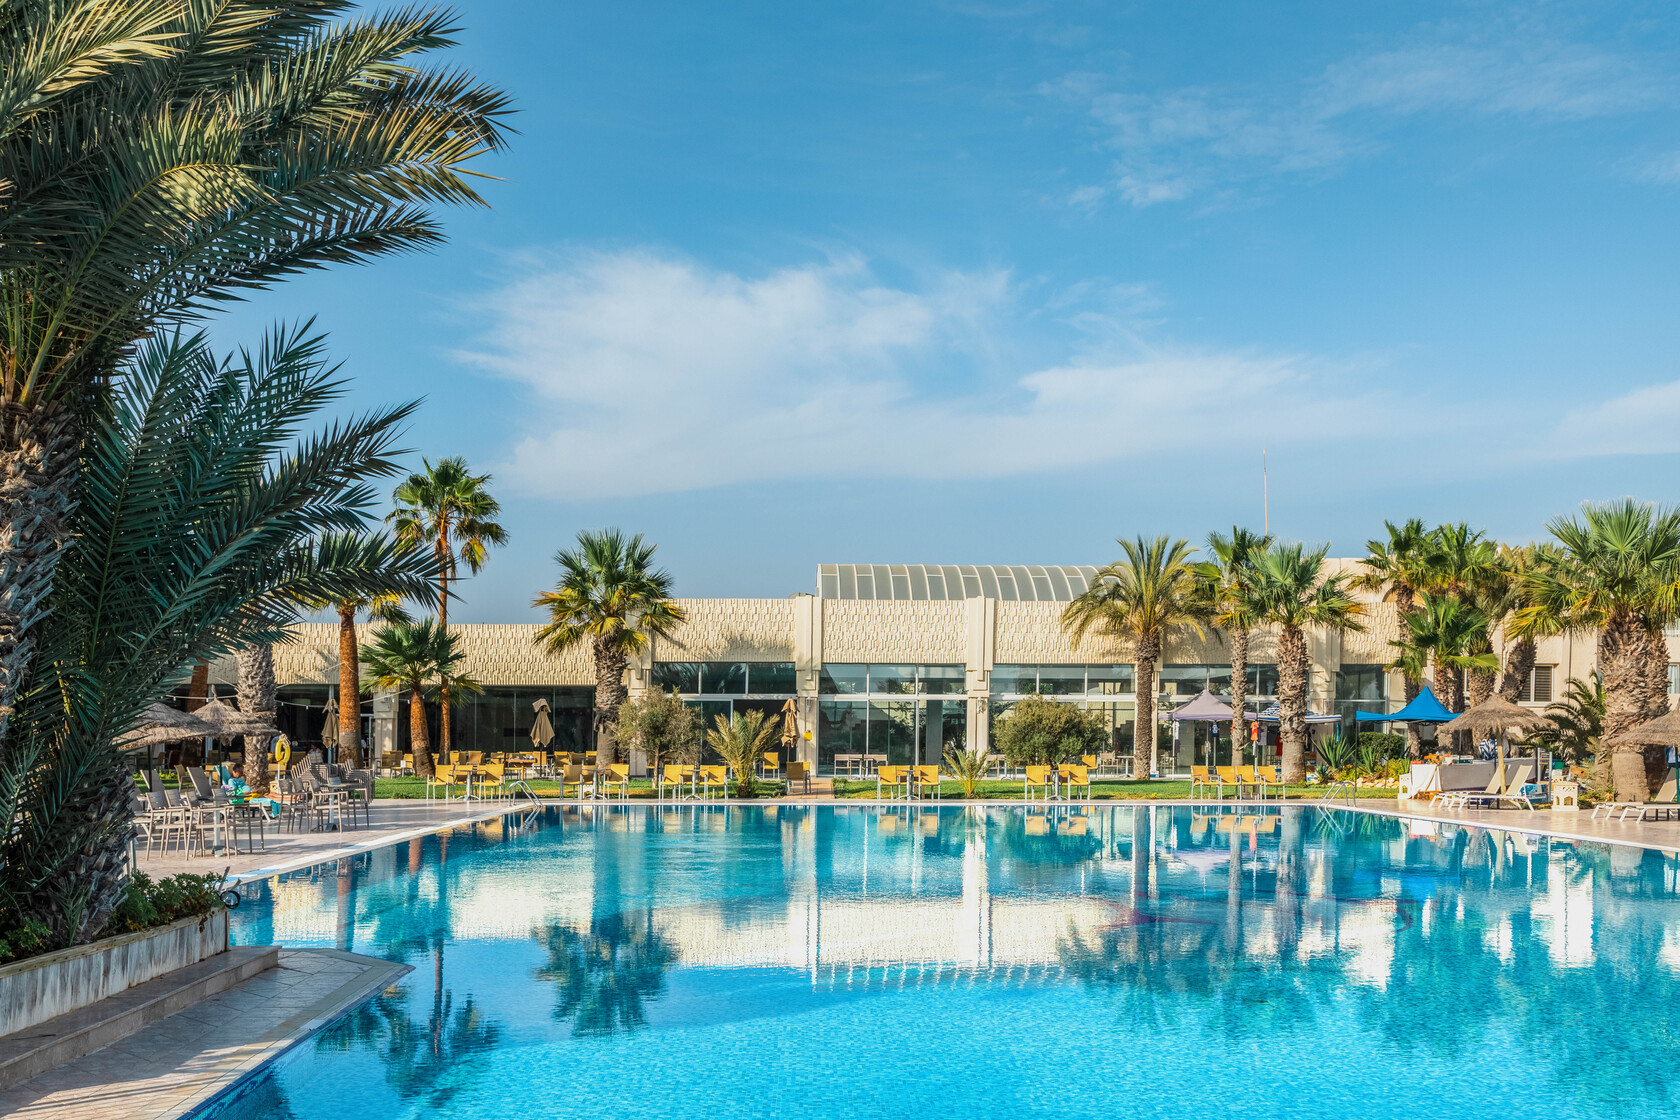 Find out about the latest renovations at Iberostar Mehari Djerba